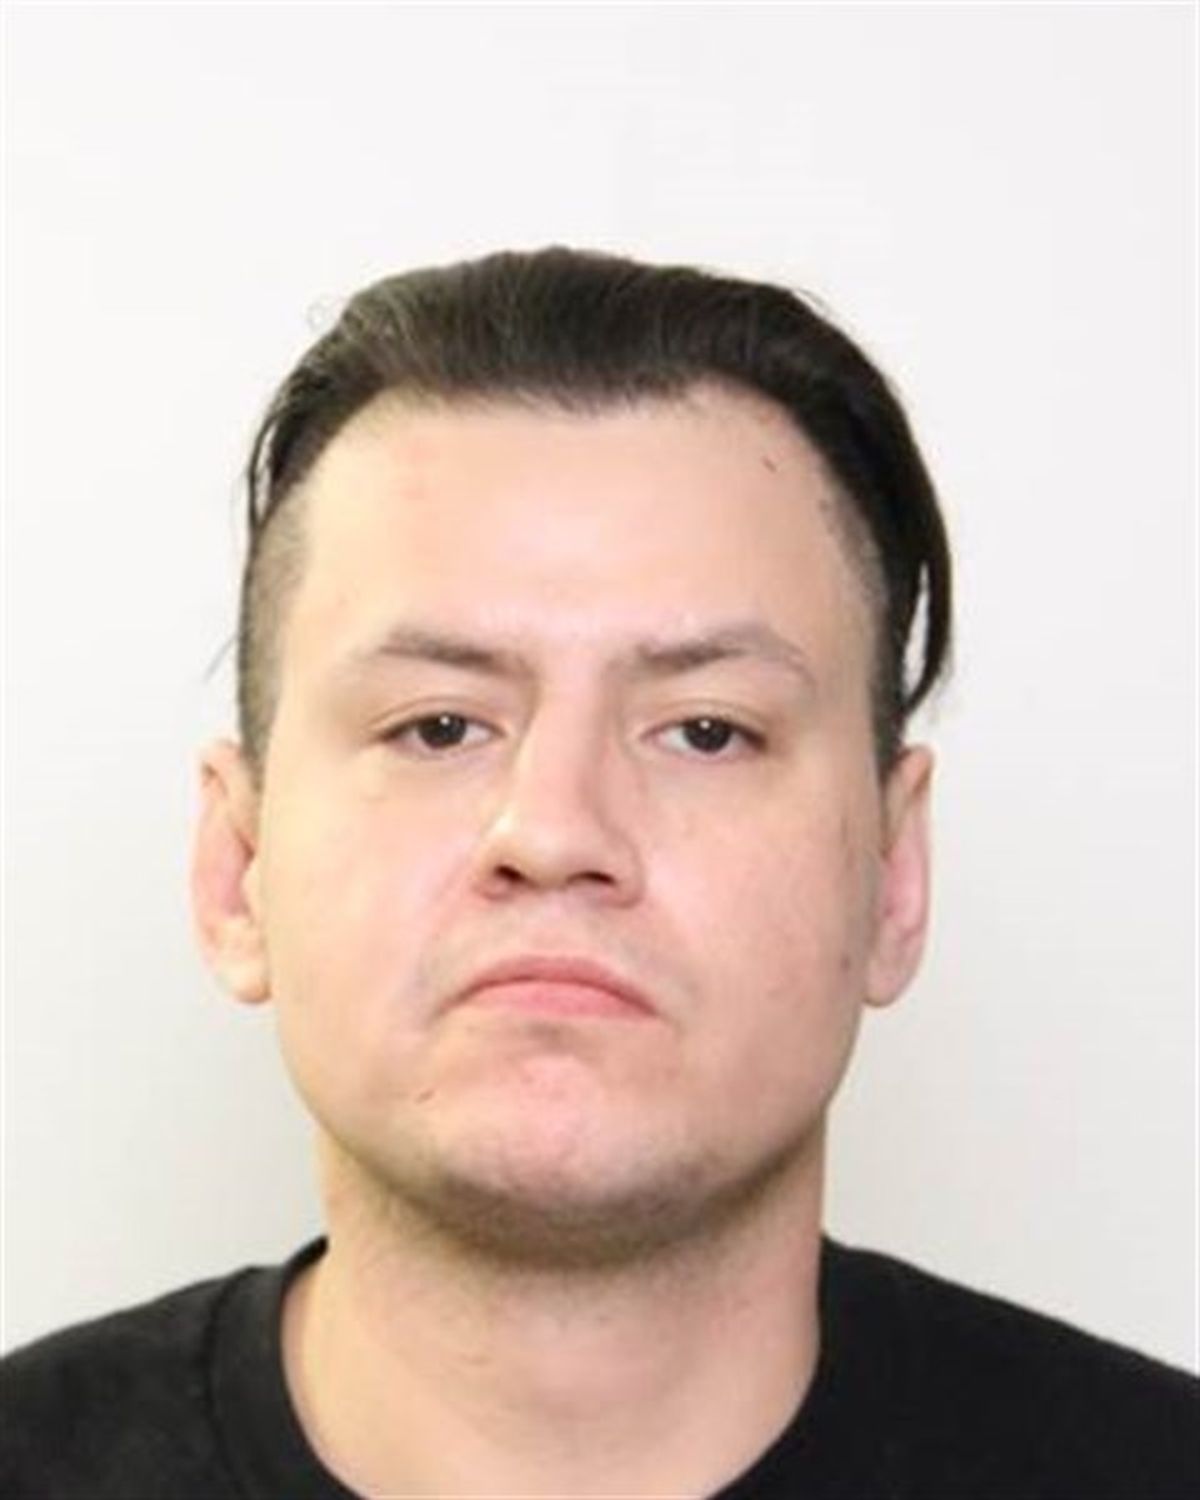 Edmonton police are looking for Jordan Ashley Belhumeur, who they said is "wanted on numerous warrants including assault causing bodily harm, robbery, uttering threats to cause death or bodily harm and intimidation" in connection with an assault.